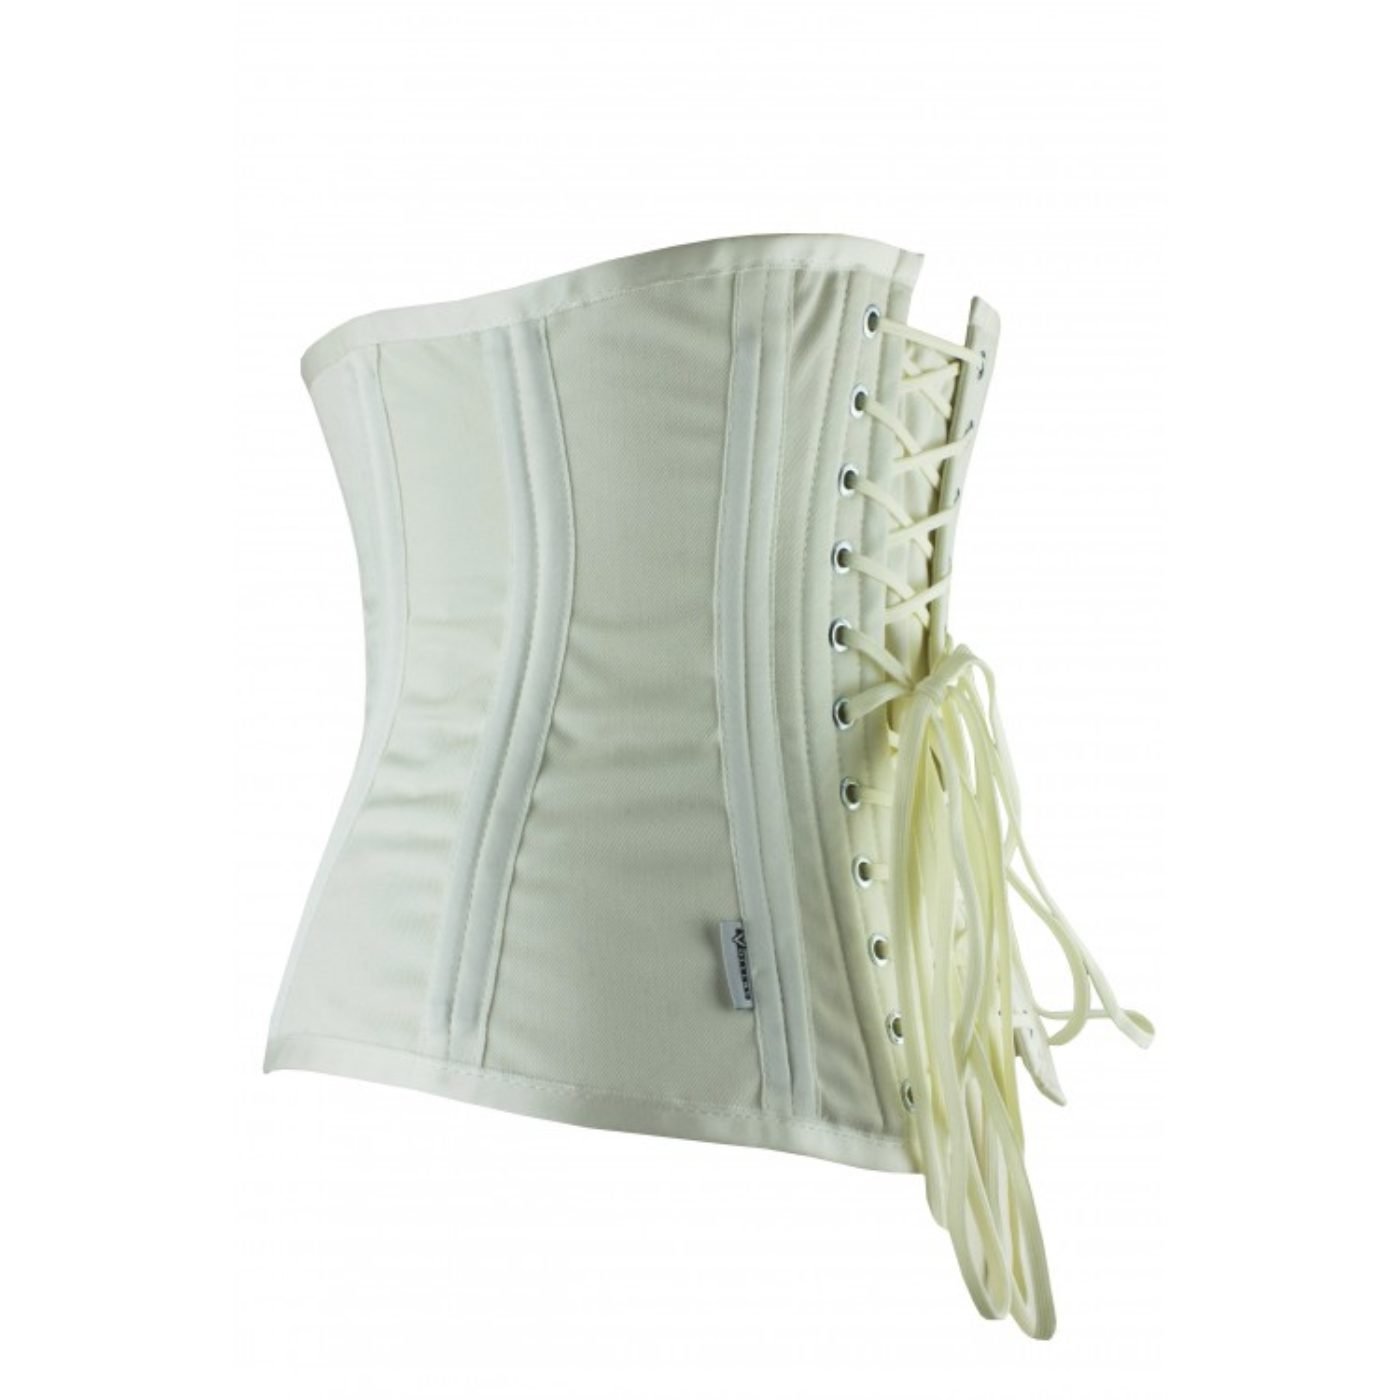 Back View of the Majestic waist training corset | By Vollers